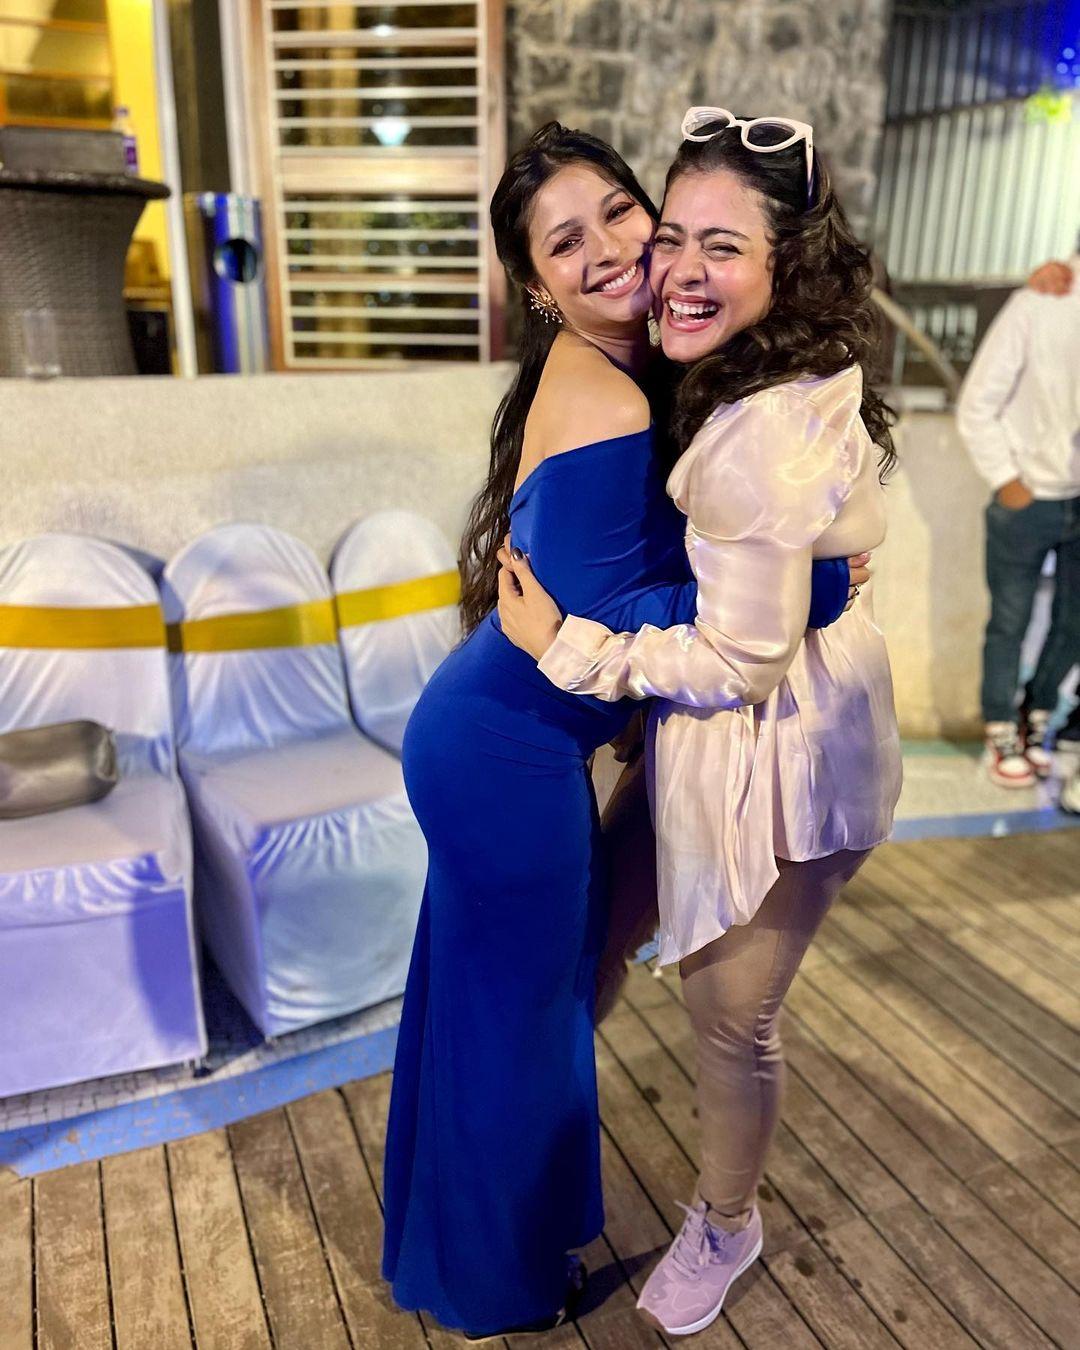 The Mukherjee sisters, Kajol and Tanisha, are always present for their family functions and get togethers and often treat their fans with some adorable clicks of themselves